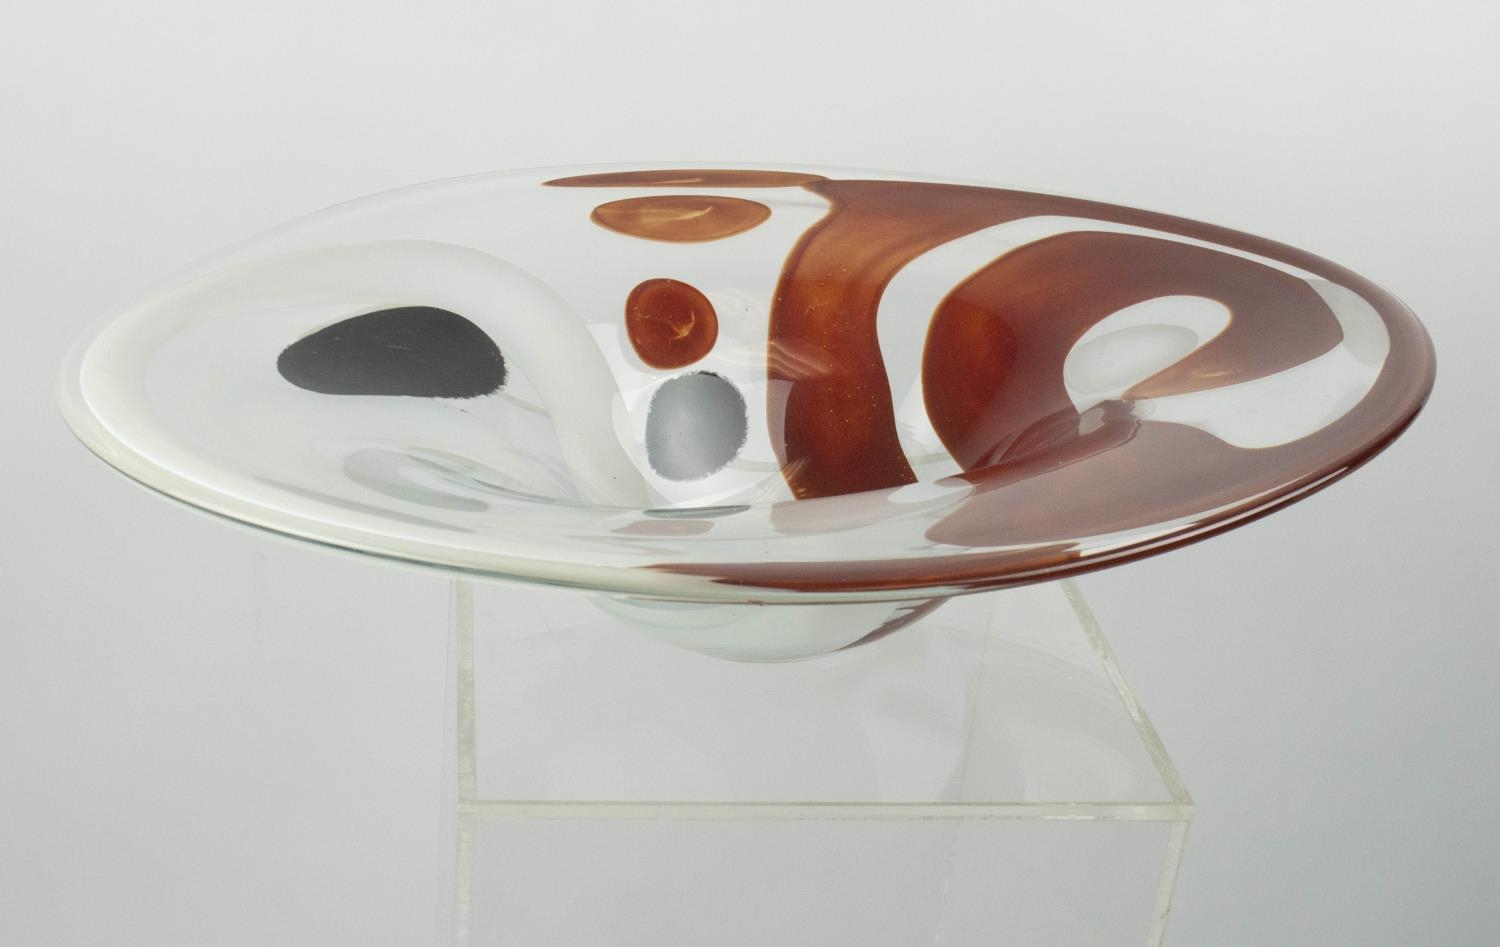 ART GLASS BOWL, late 20th century shaped with red, white and black design, 52cm L x 39cm W x 13cm H. - Image 5 of 8